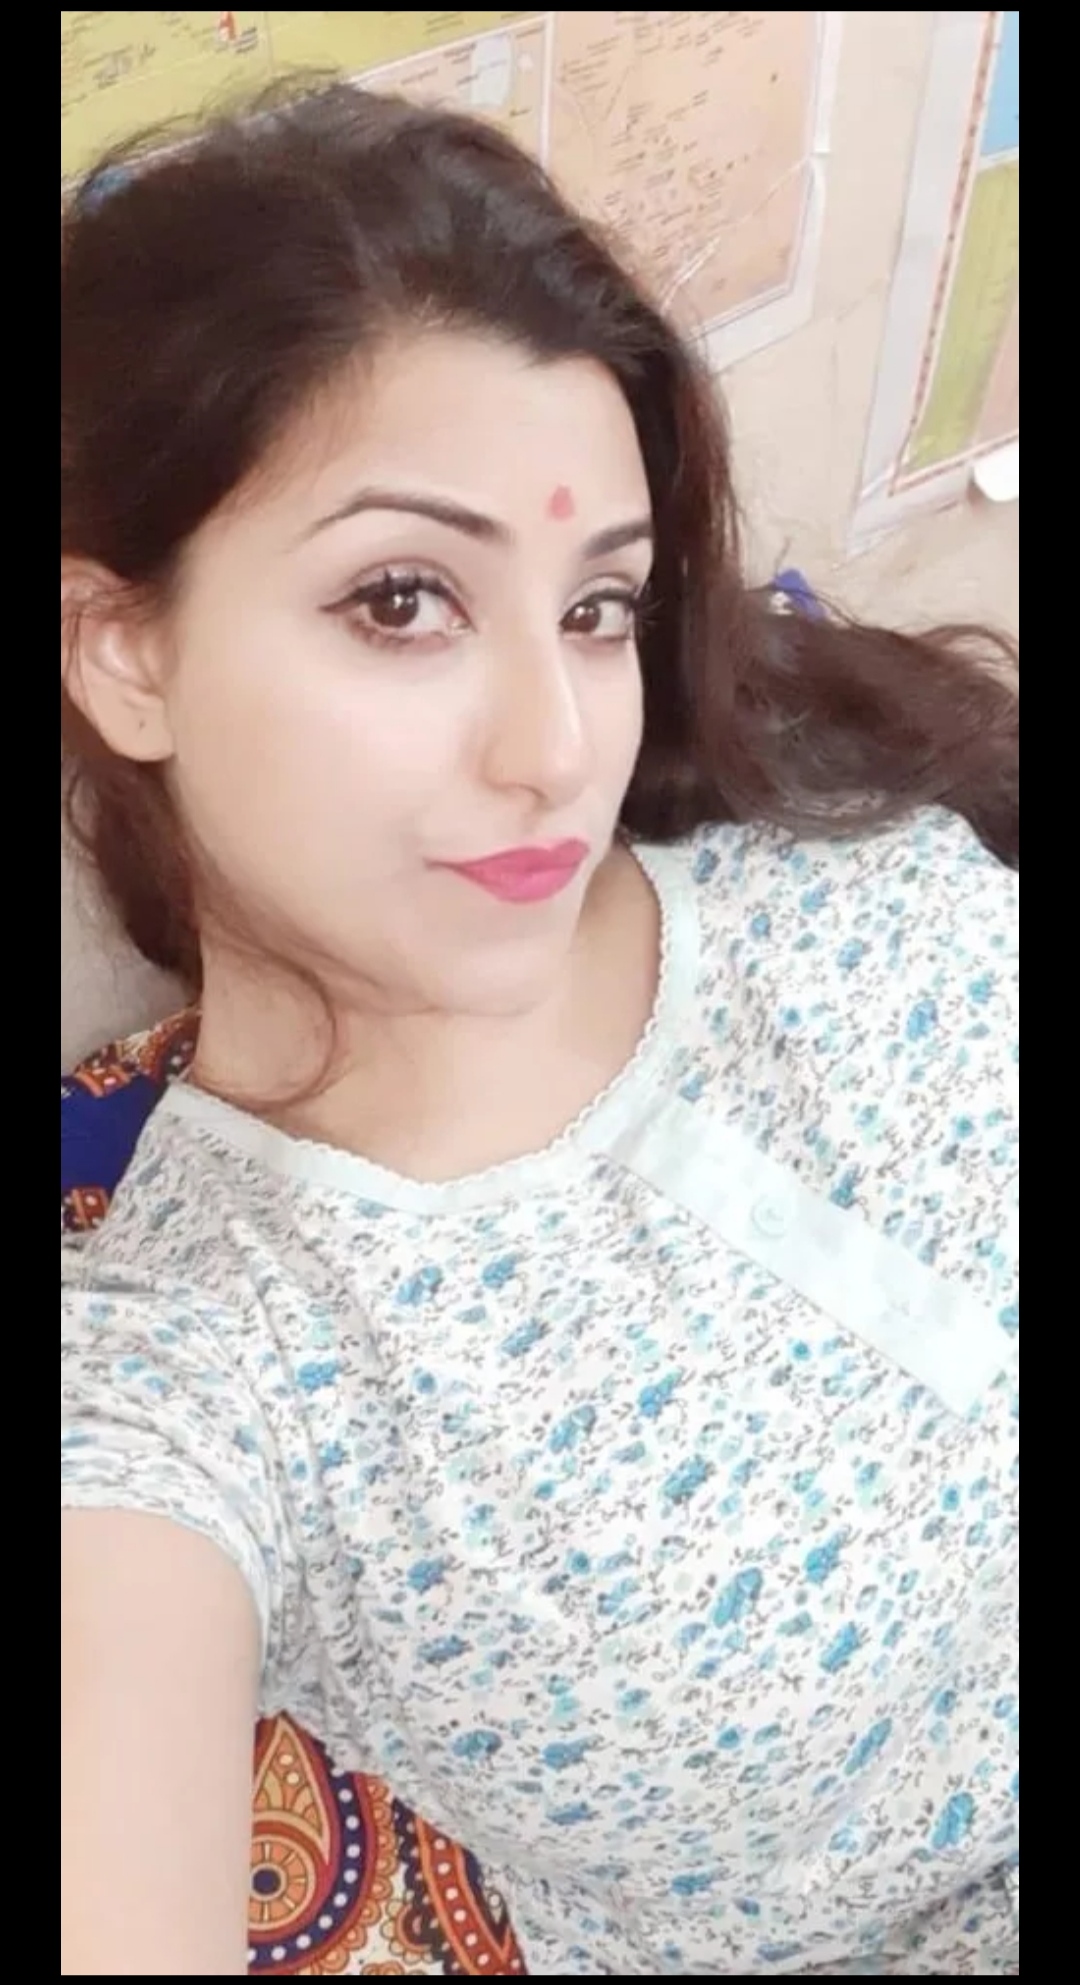 ♥️♥️🔥hot Desi Milf💦💦🔥 ━━━━━━━━━━━━━━━━ 👇 Download Link In The Comments 